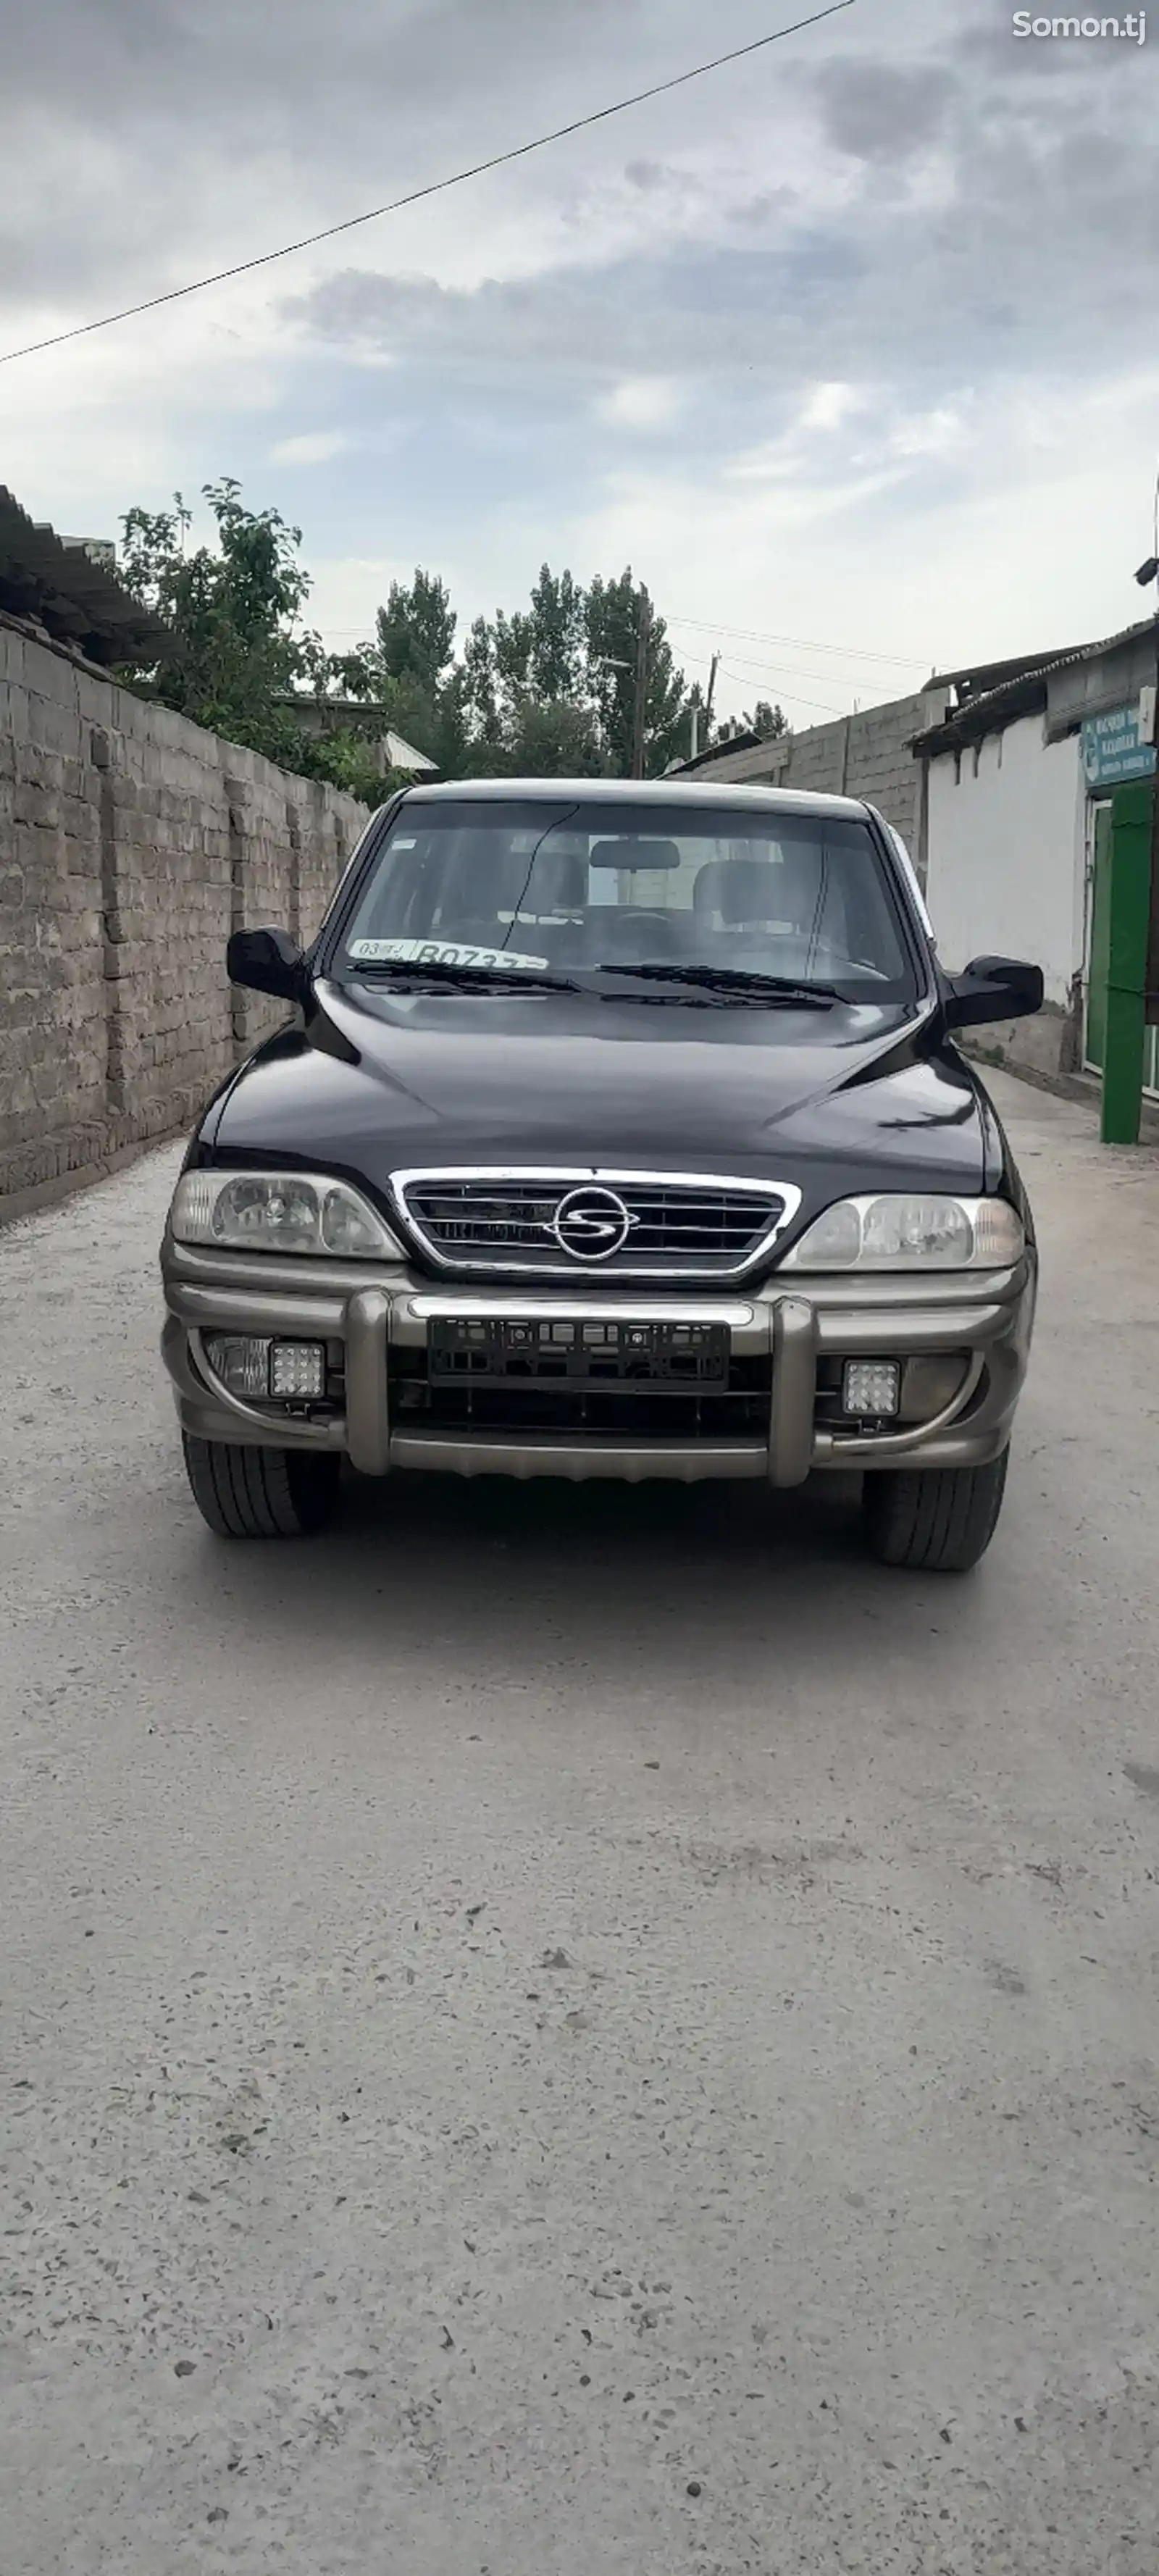 Ssang Yong Musso, 2000-1